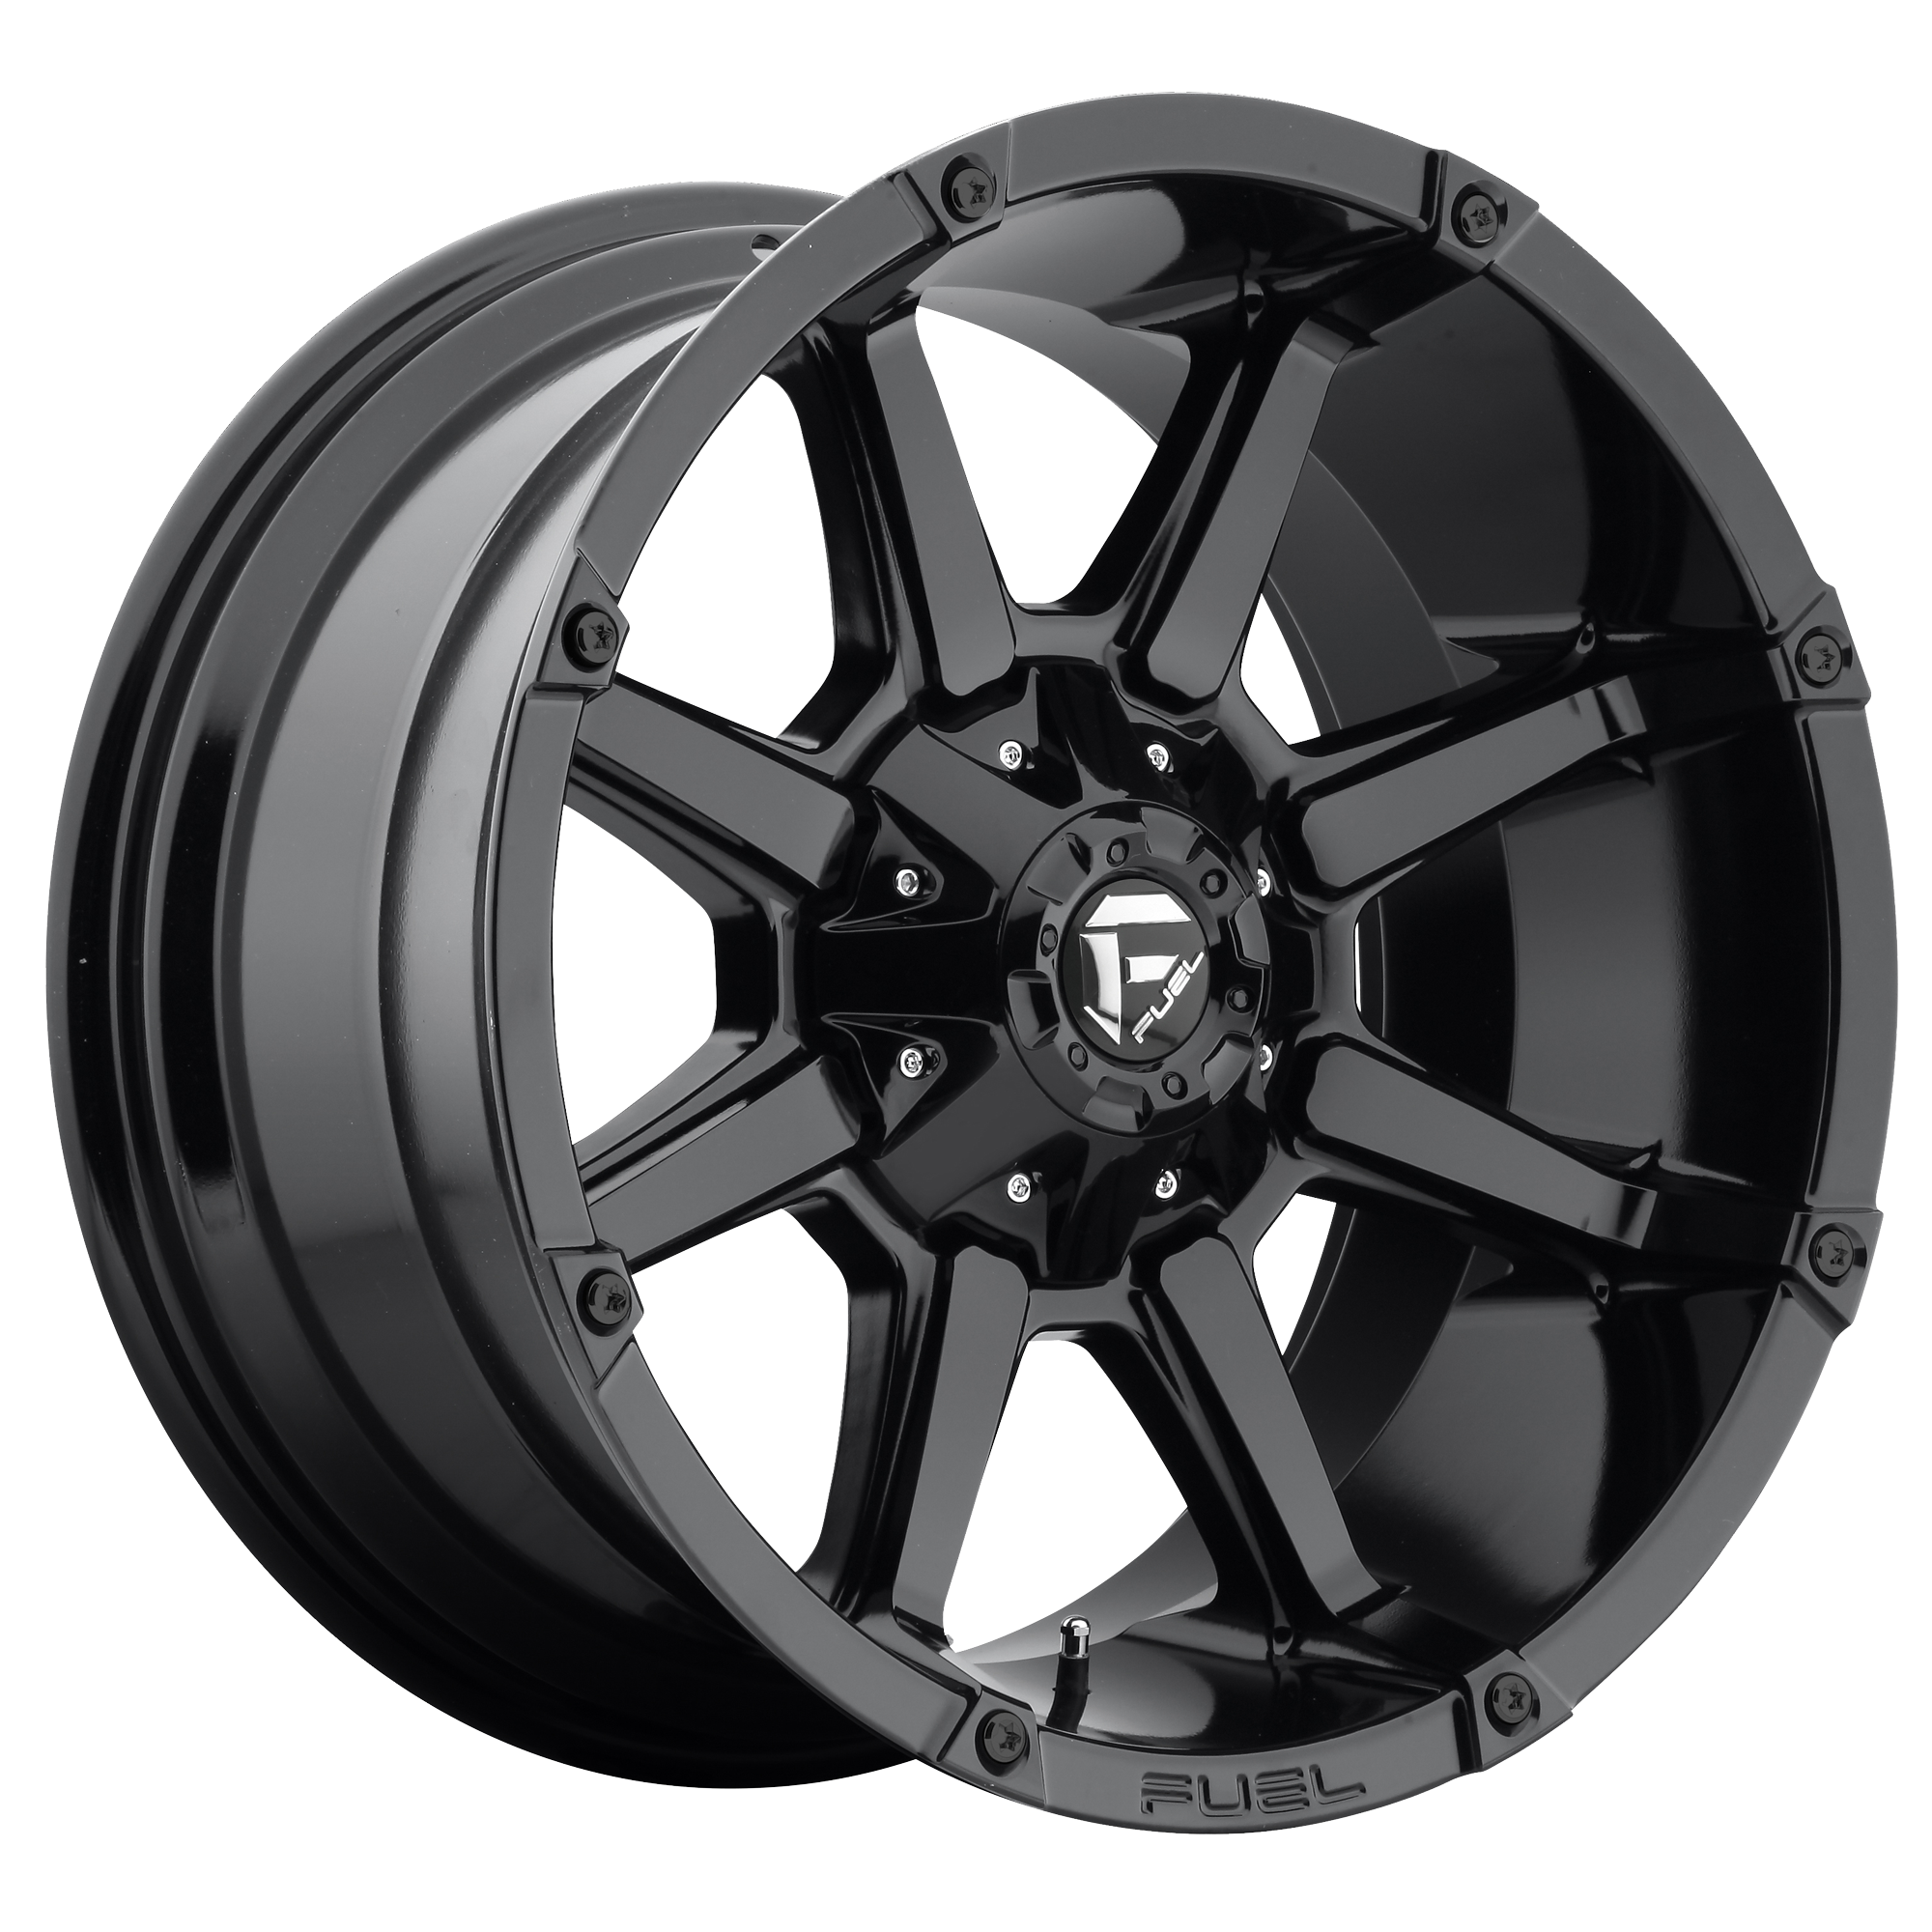 COUPLER 20x10 5x114.30/5x127.00 GLOSS BLACK (-12 mm) - Tires and Engine Performance